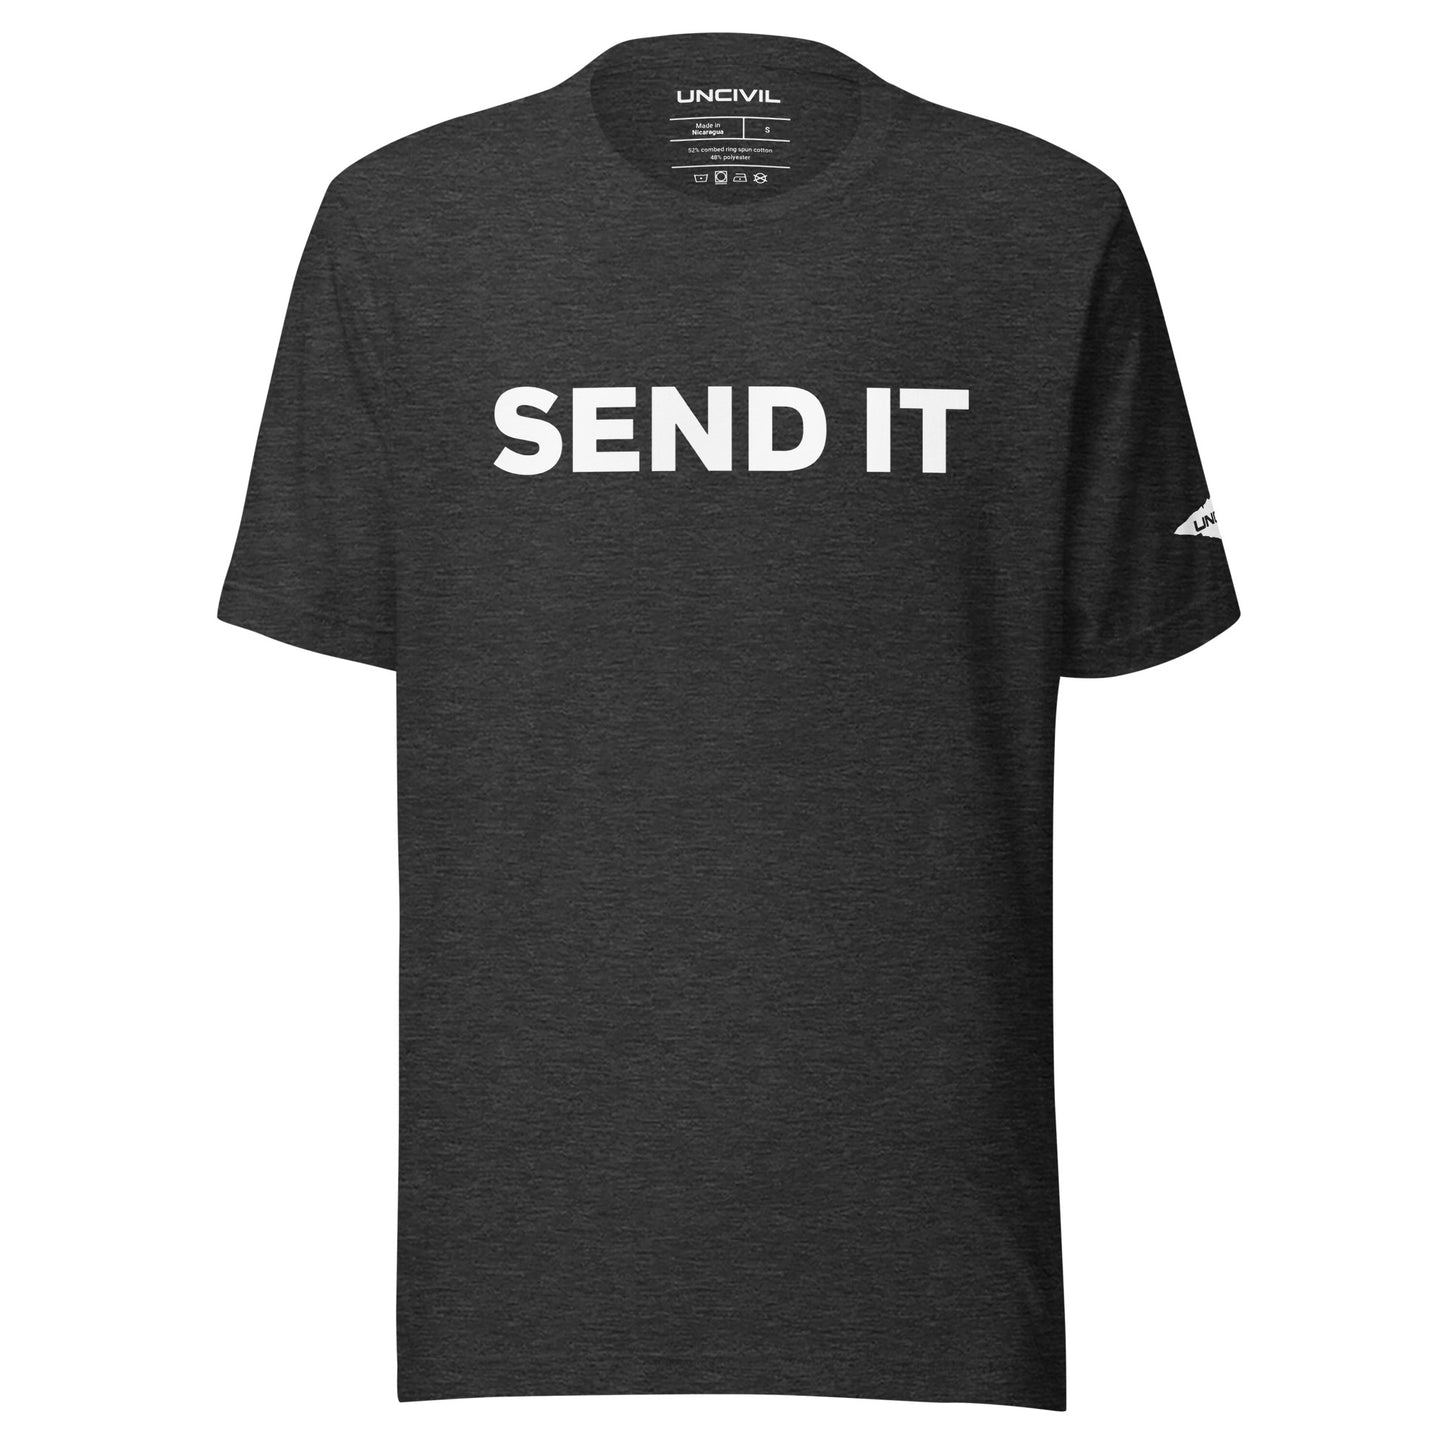 Send It is often used as an expression to indicate taking action or proceeding with a plan. Dark Grey Heather men's shirt.